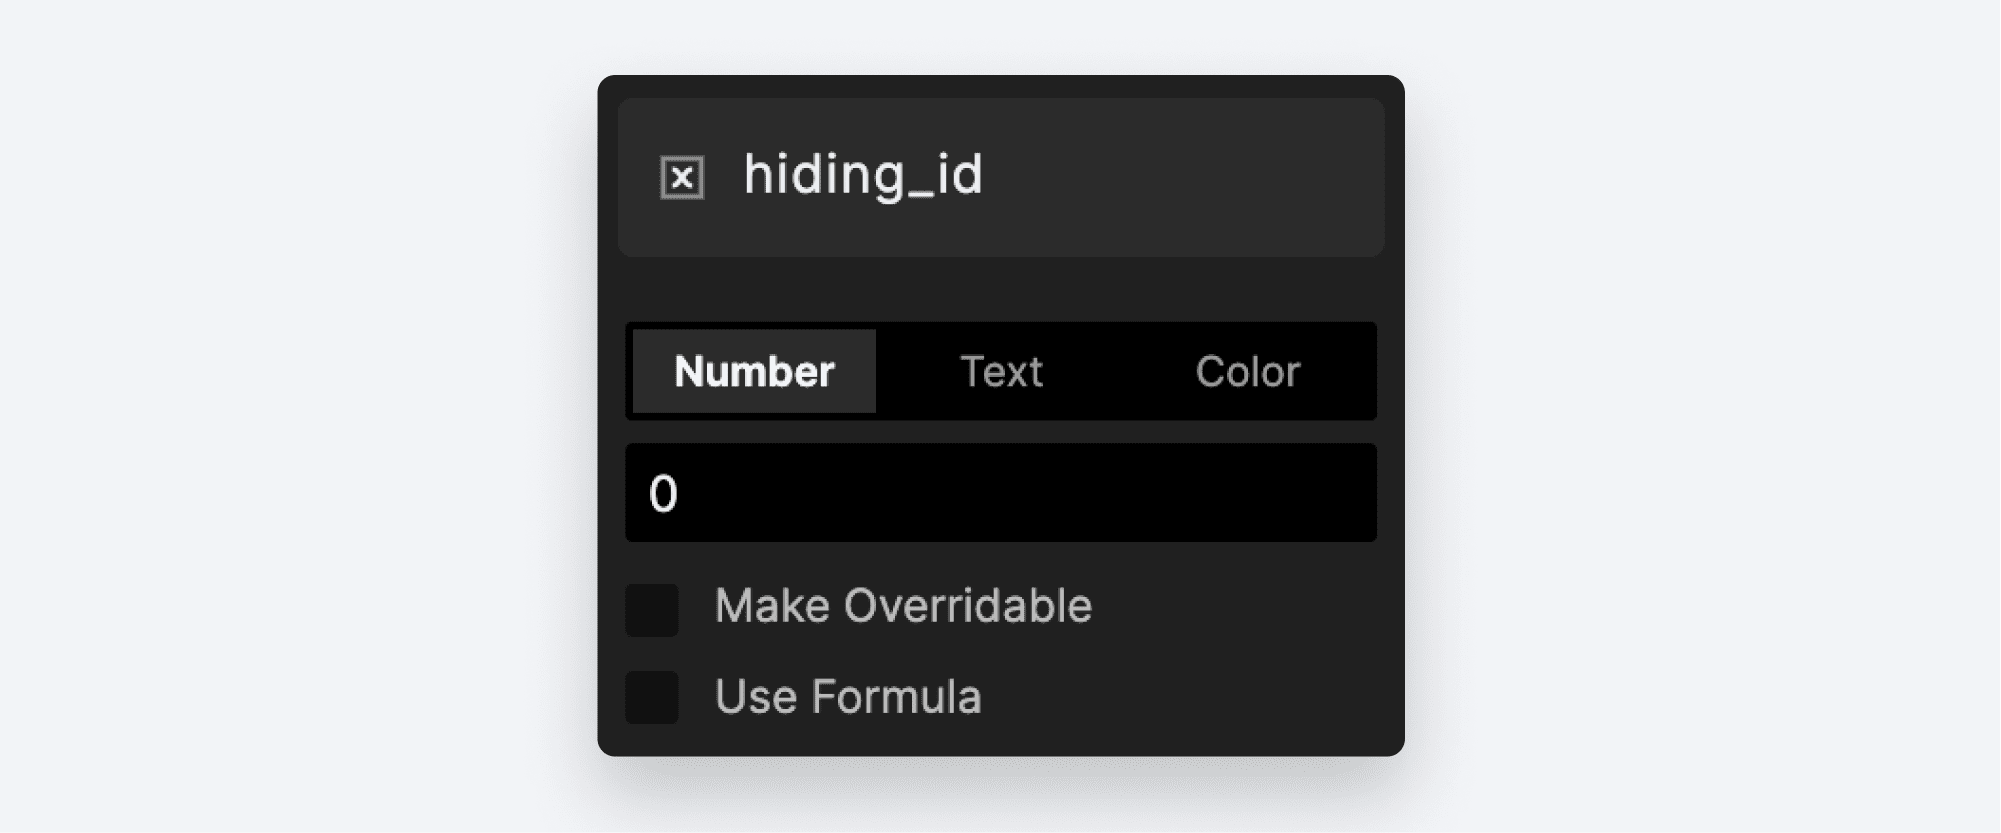 new variable called hiding_id